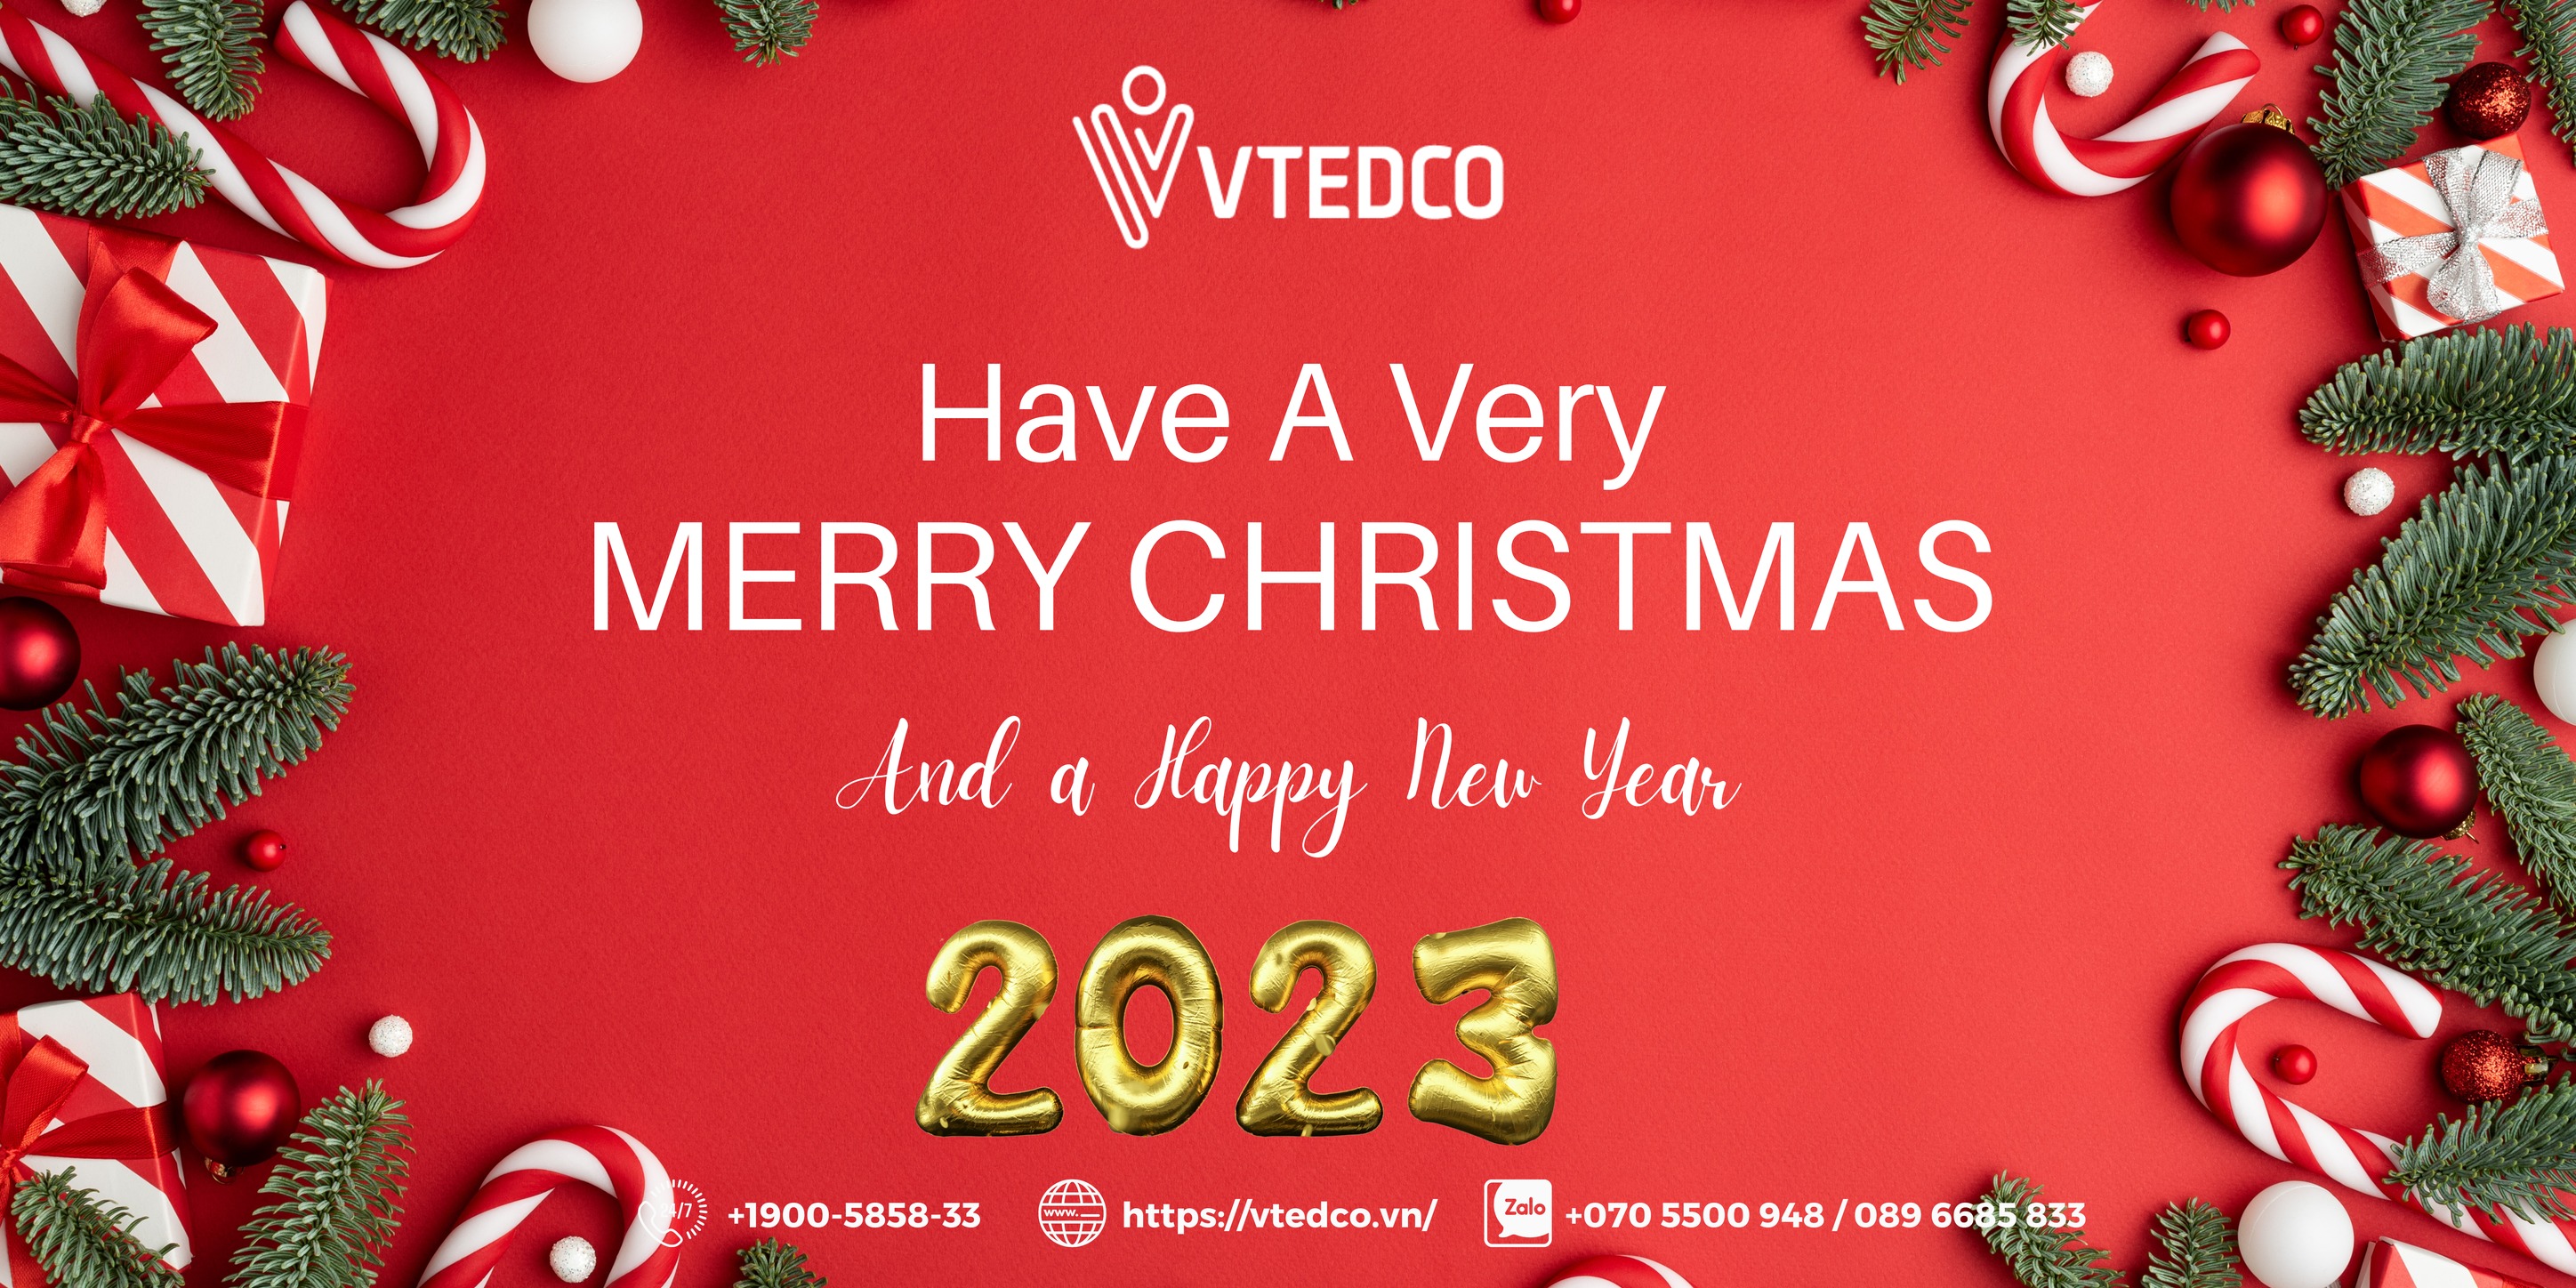 🎊 Merry Christmas and Happy New Year 2023